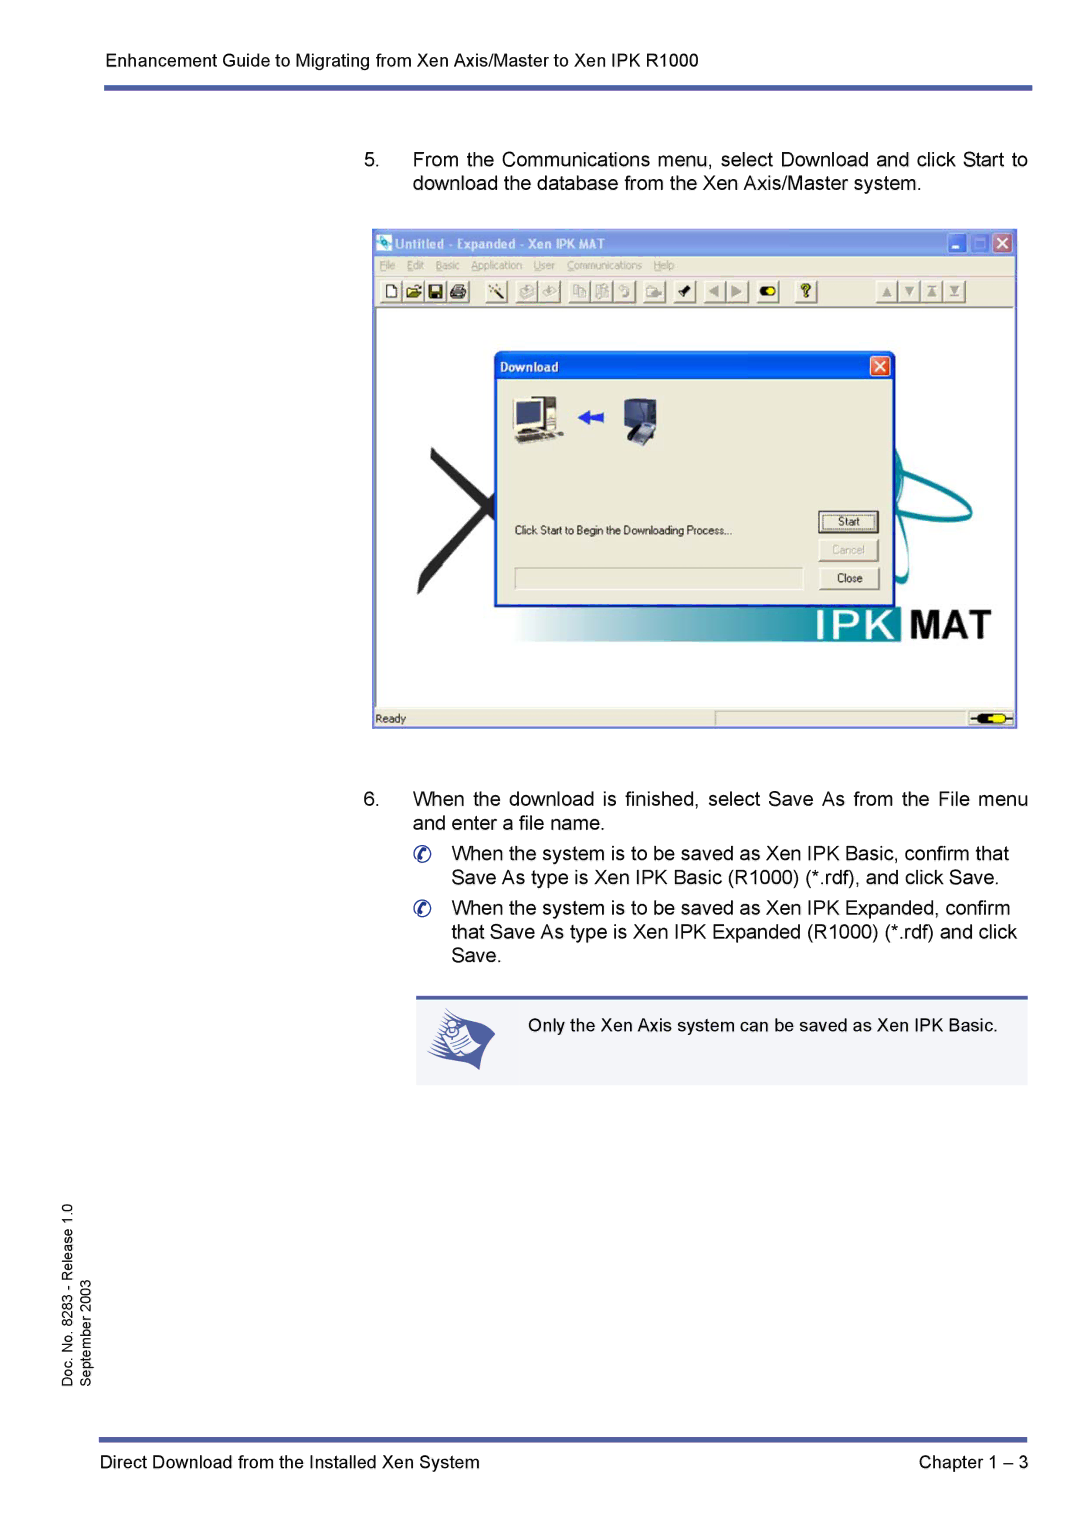 NEC R1000 manual Only the Xen Axis system can be saved as Xen IPK Basic 